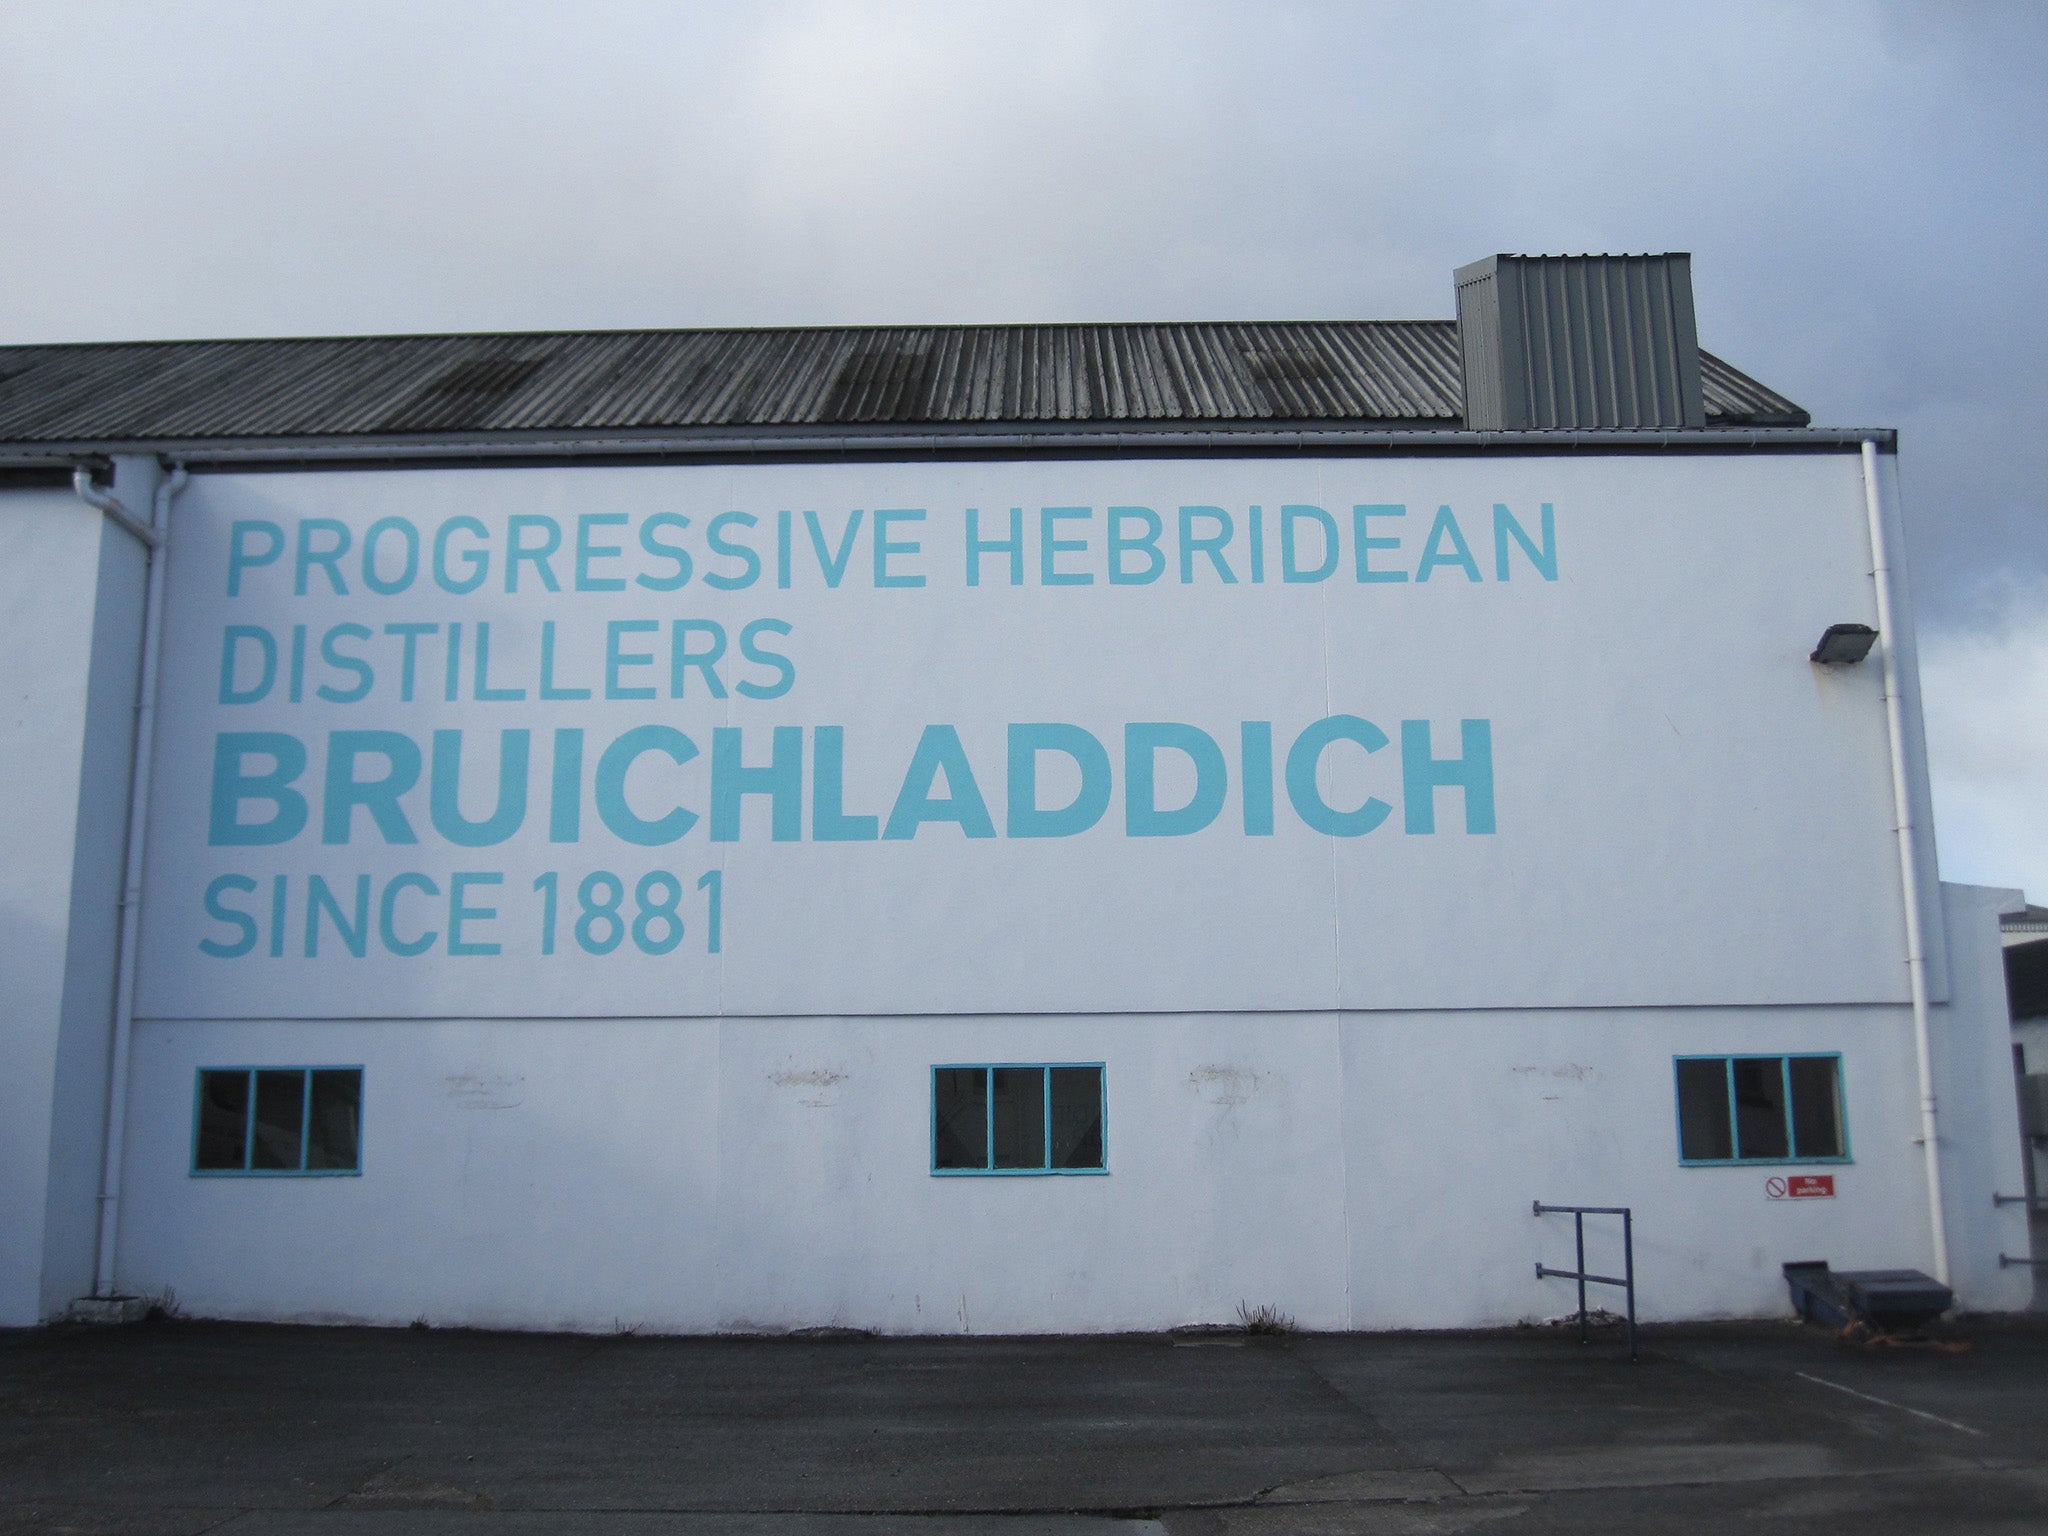 Bruichladdich Distillery is one of two distilleries on Islay that grows a proportion of its own barley and bottles its whisky on the island